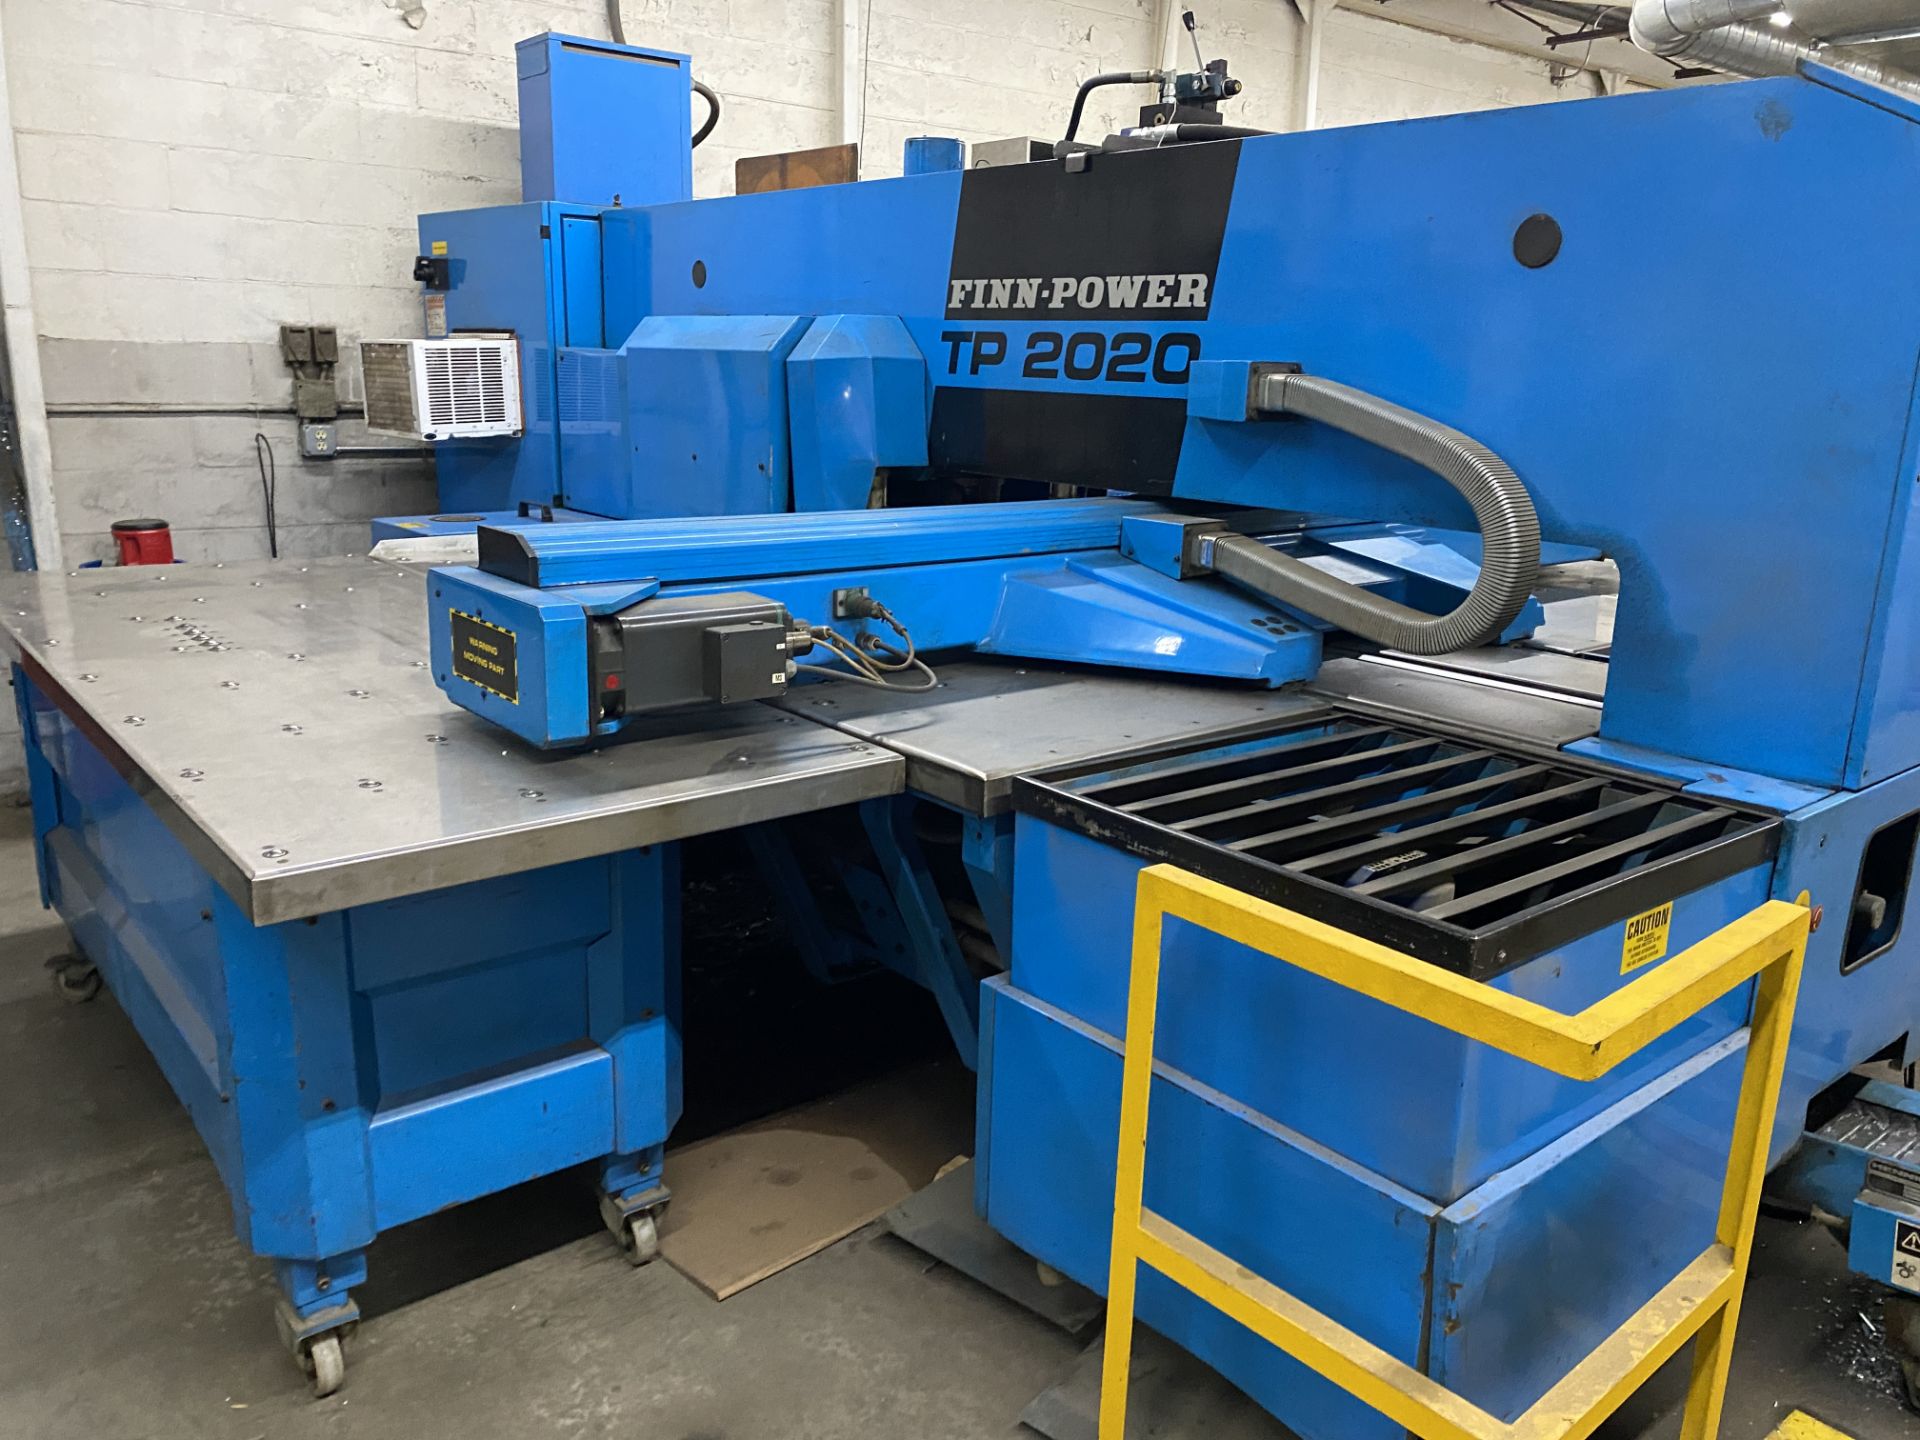 (1) 1993 Finn-Power TP 2020 Rotary Turret Punch, Type TP-.20201F 2/21/AM, Tooling, S/N 7.7- - Image 2 of 7